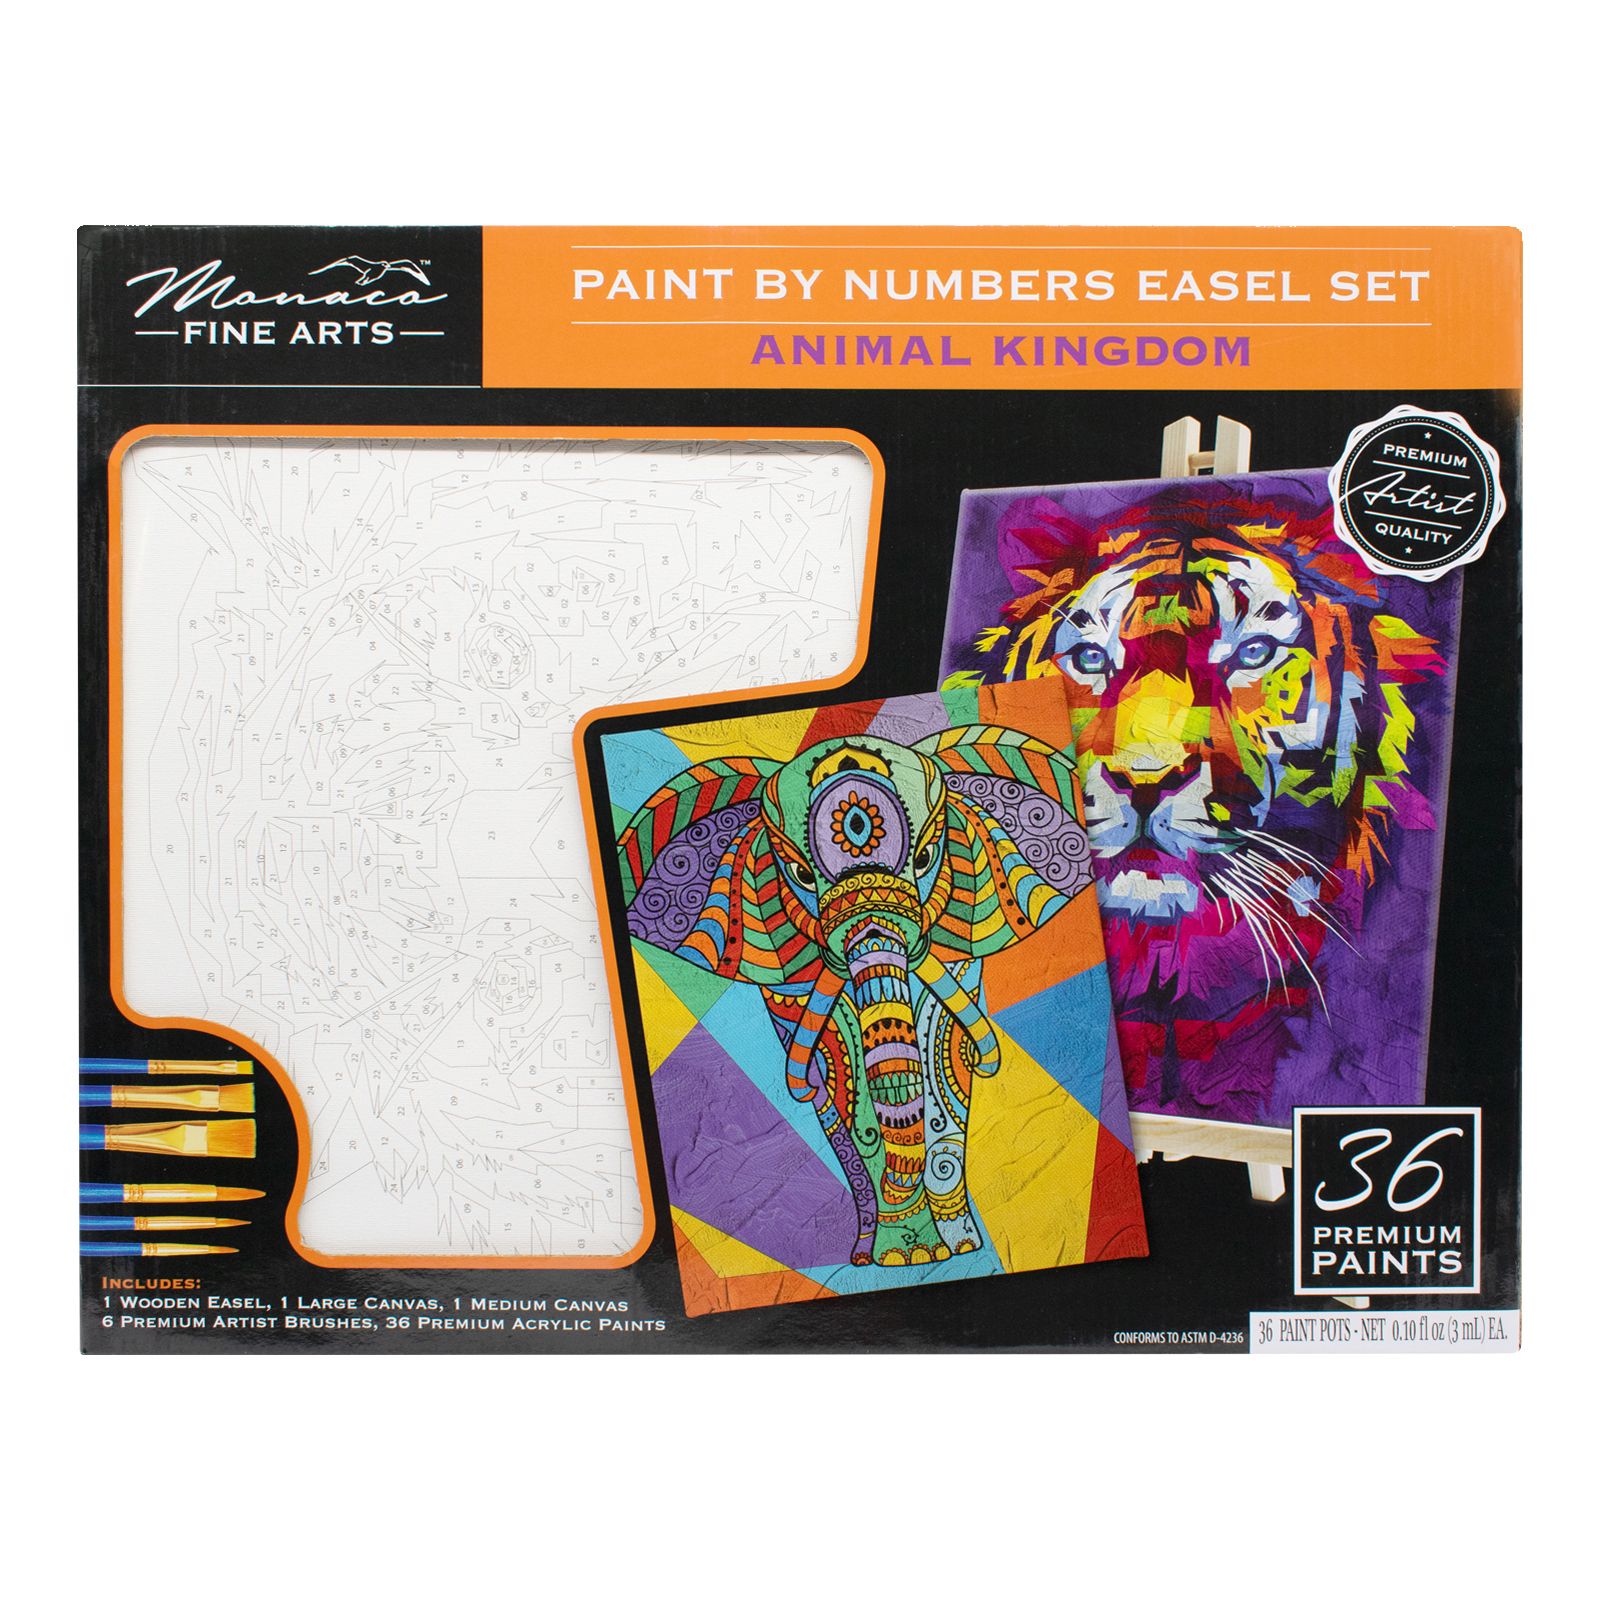 Wall Art Paint By Numbers One Set